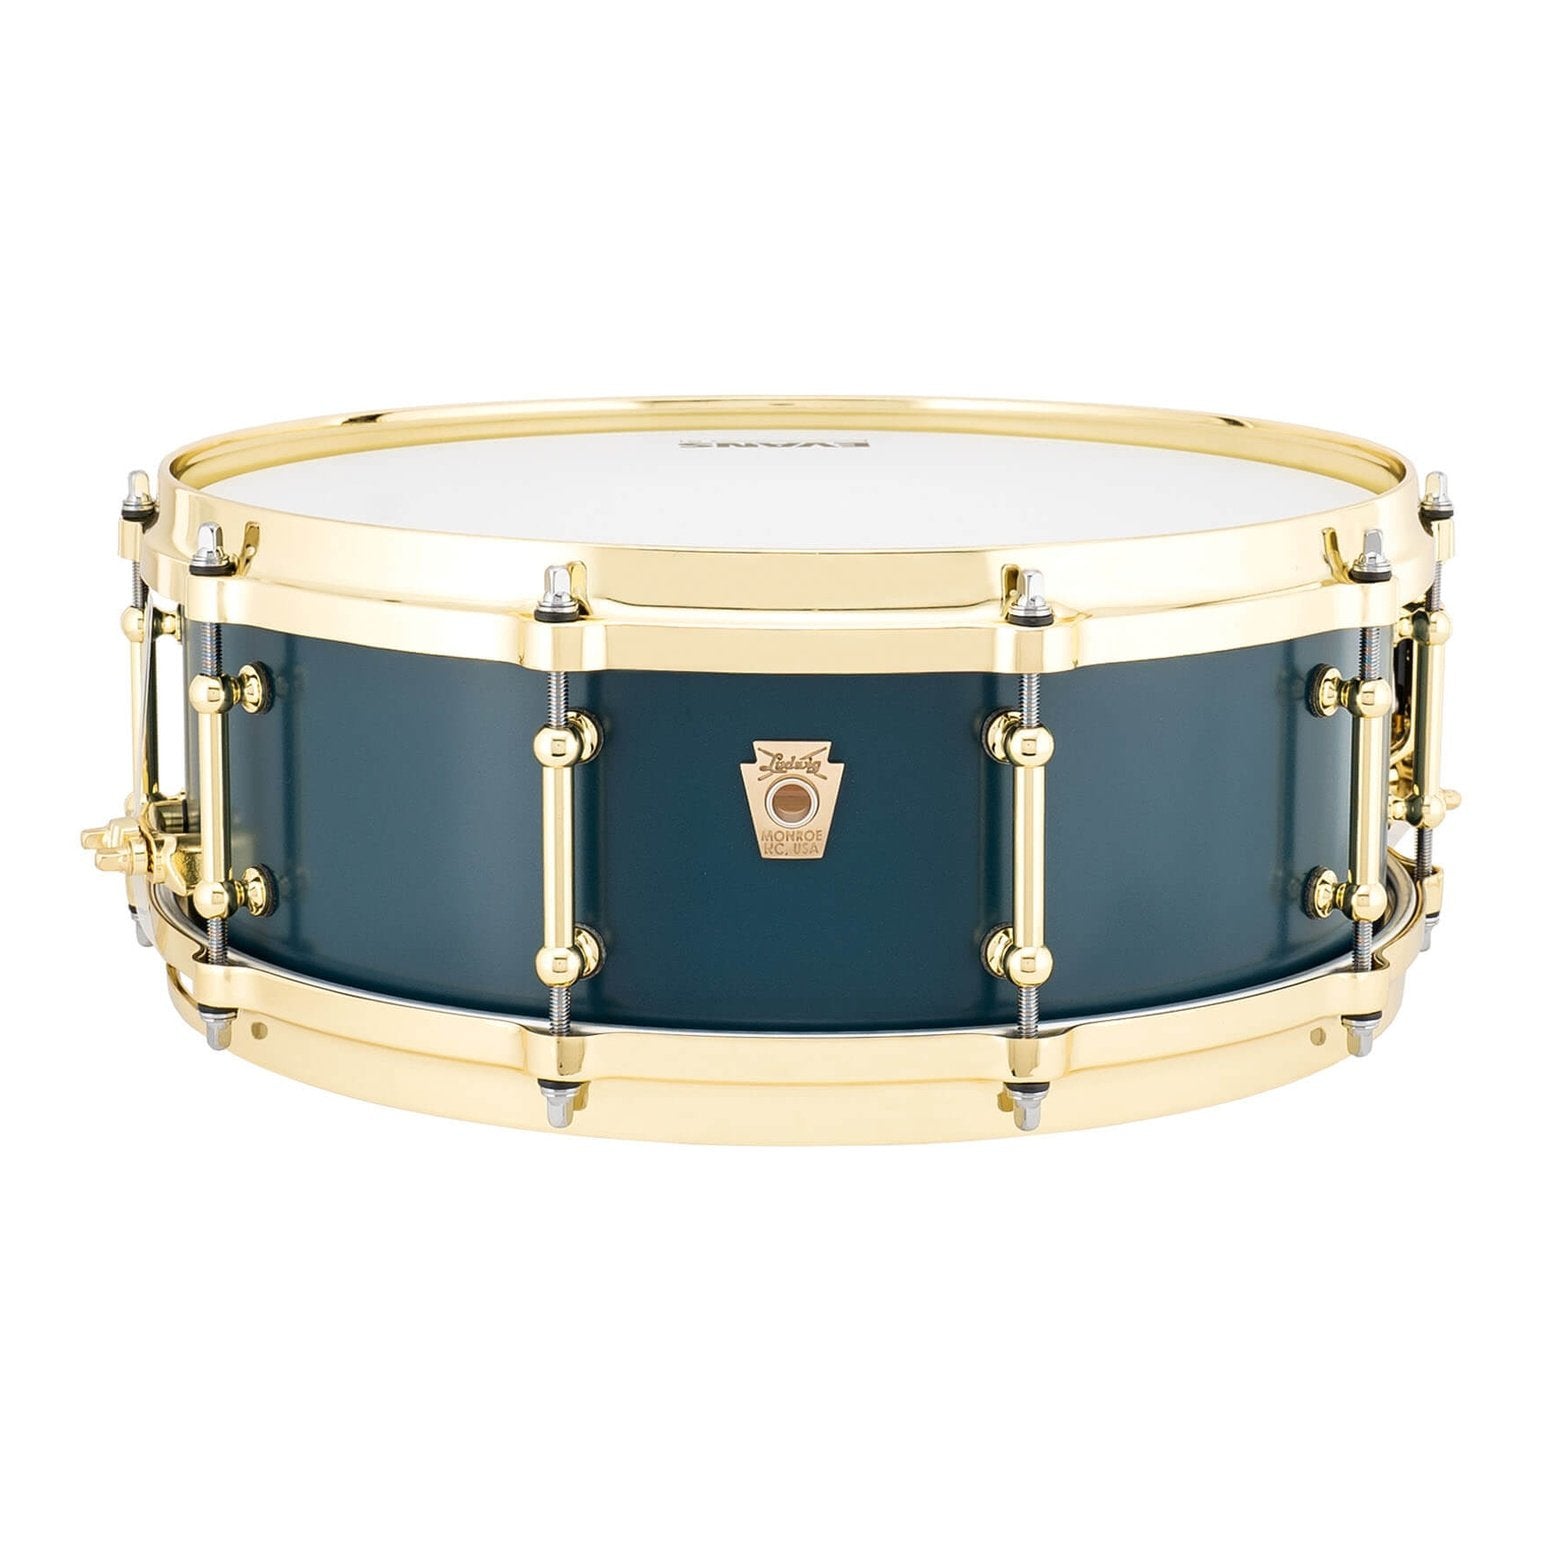 Ludwig Nate Smith "Waterbaby" Signature Snare Drum 14x5 DCP